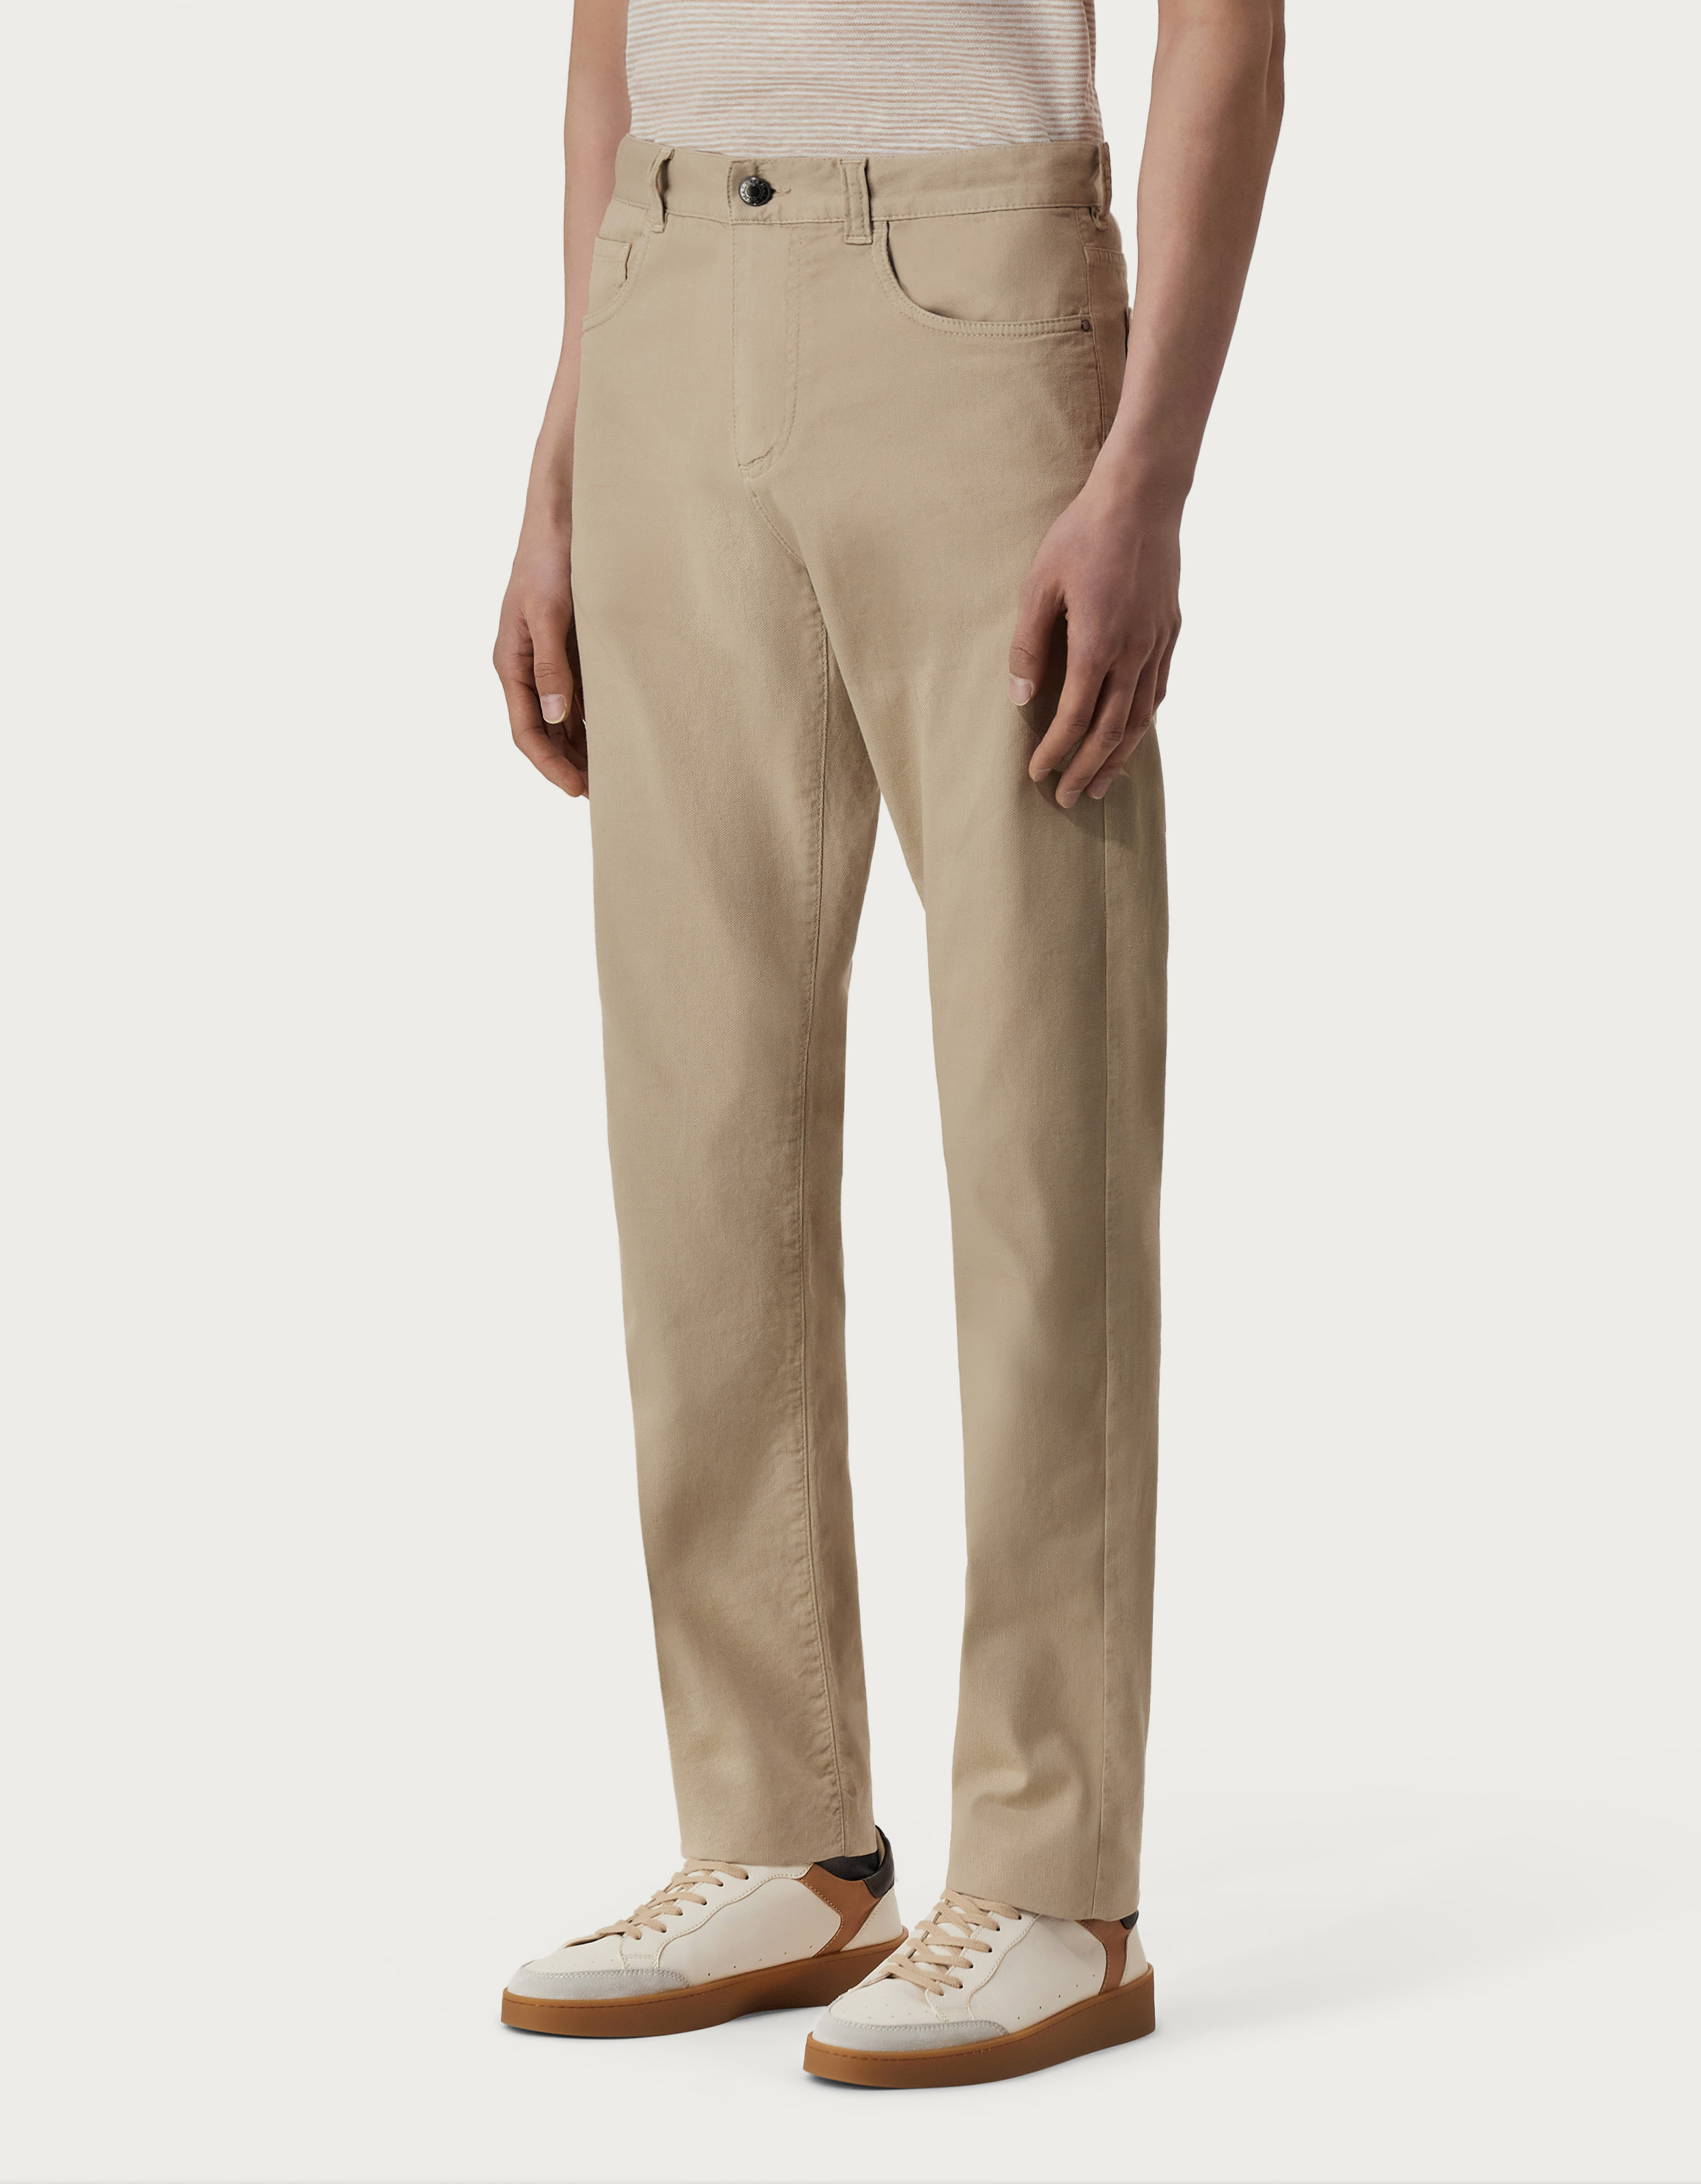 Five-pocket pants in sand cotton microtwill - Men's suits